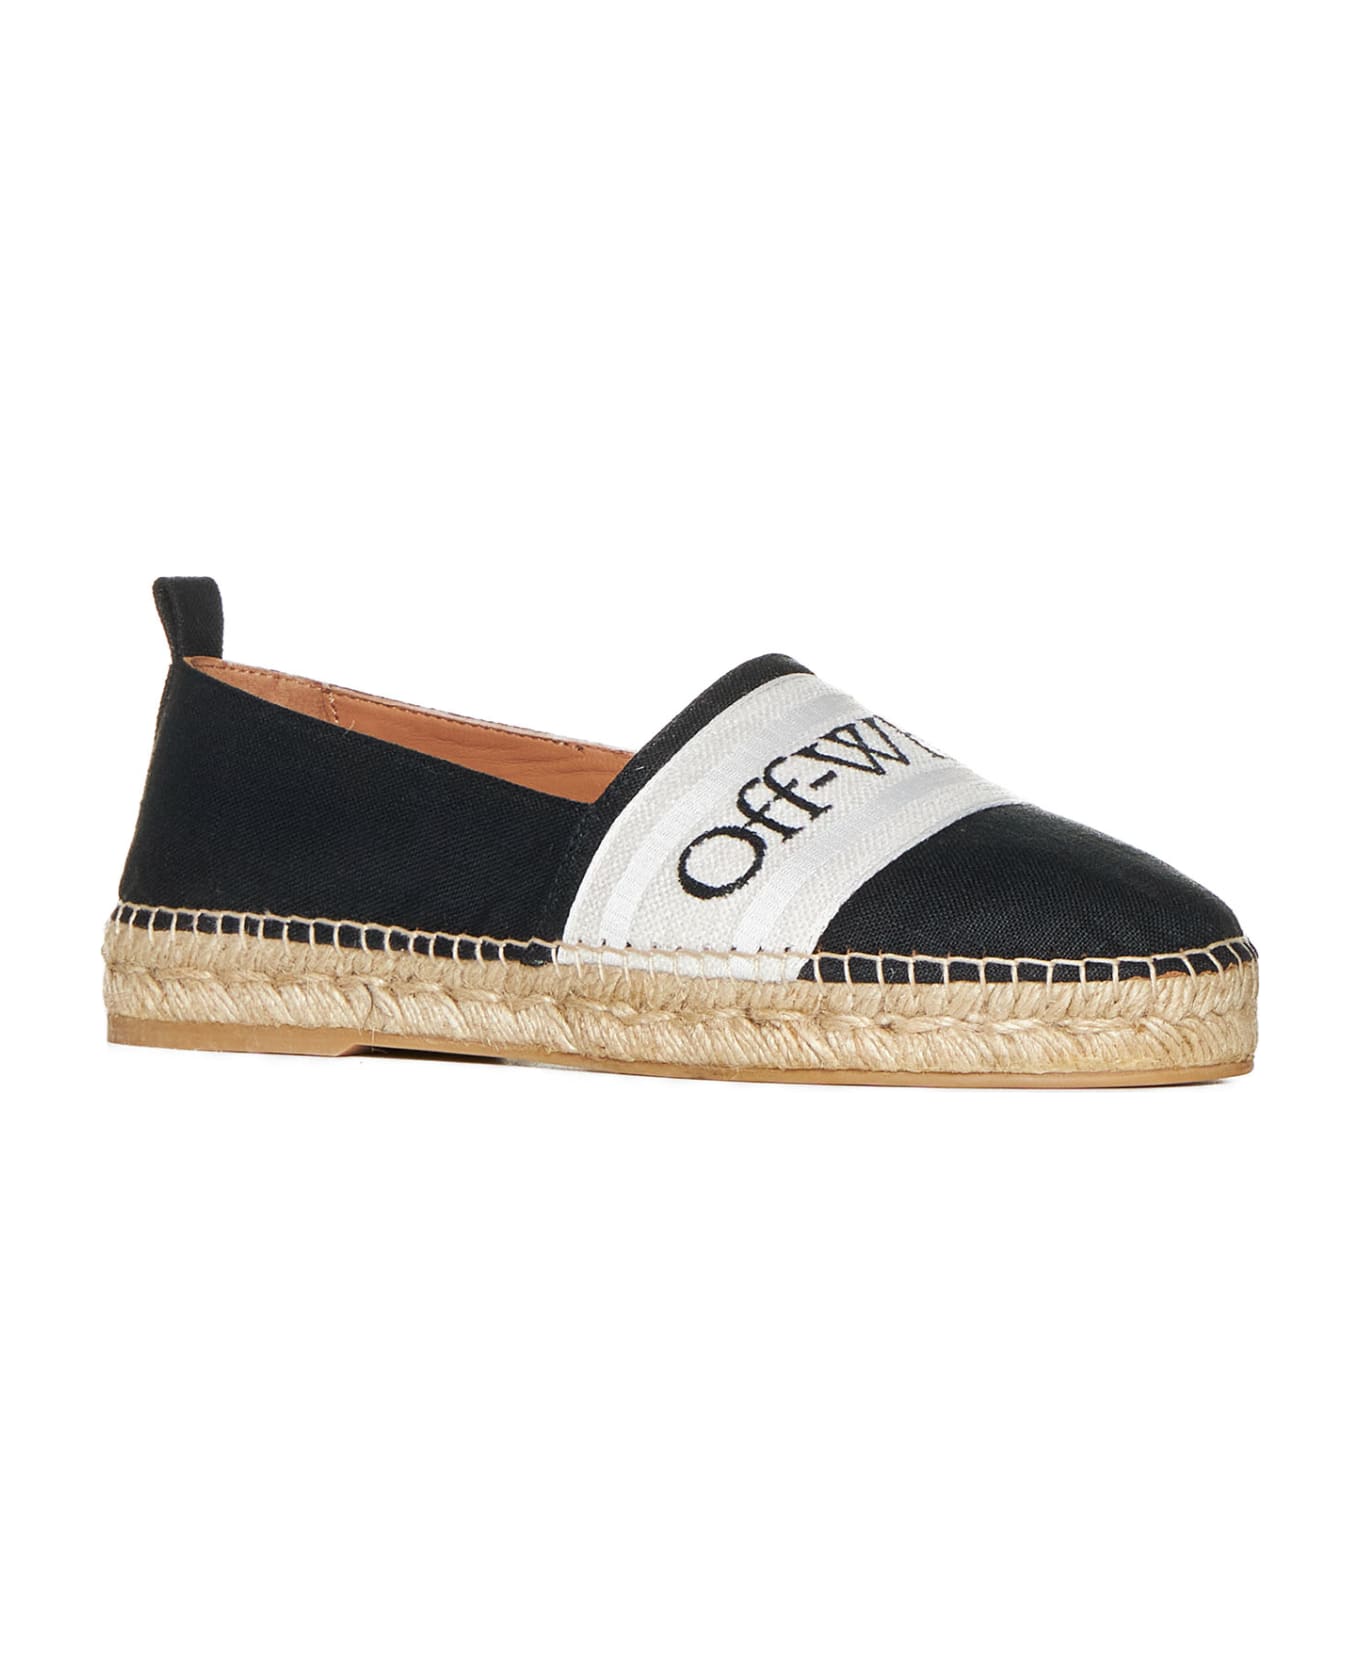 Off-White Flat Shoes - Black